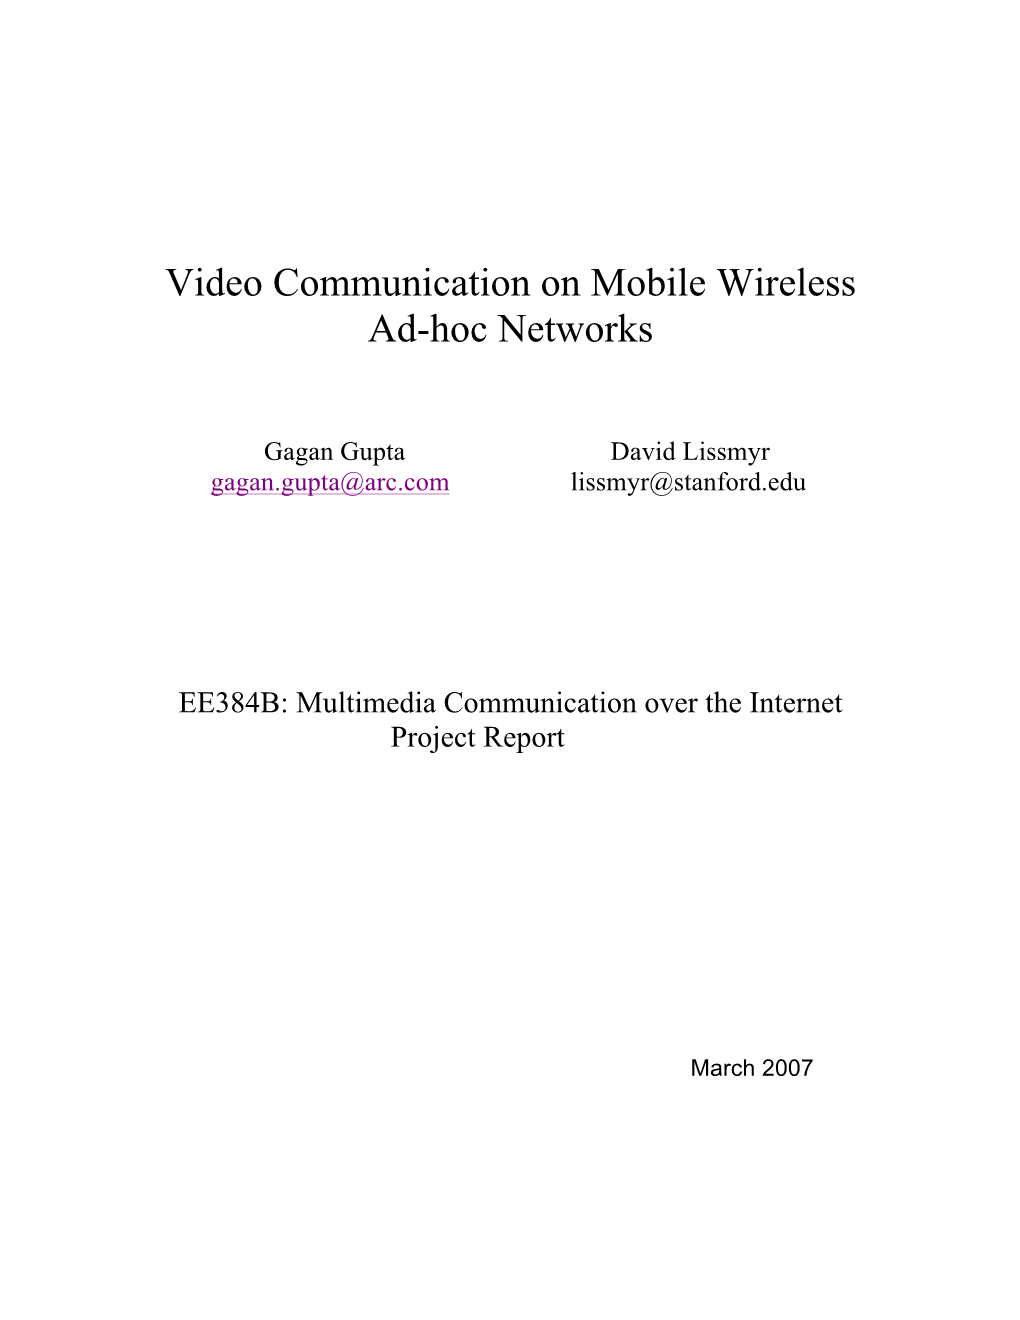 Video Communication on Mobile Wireless Ad-Hoc Networks